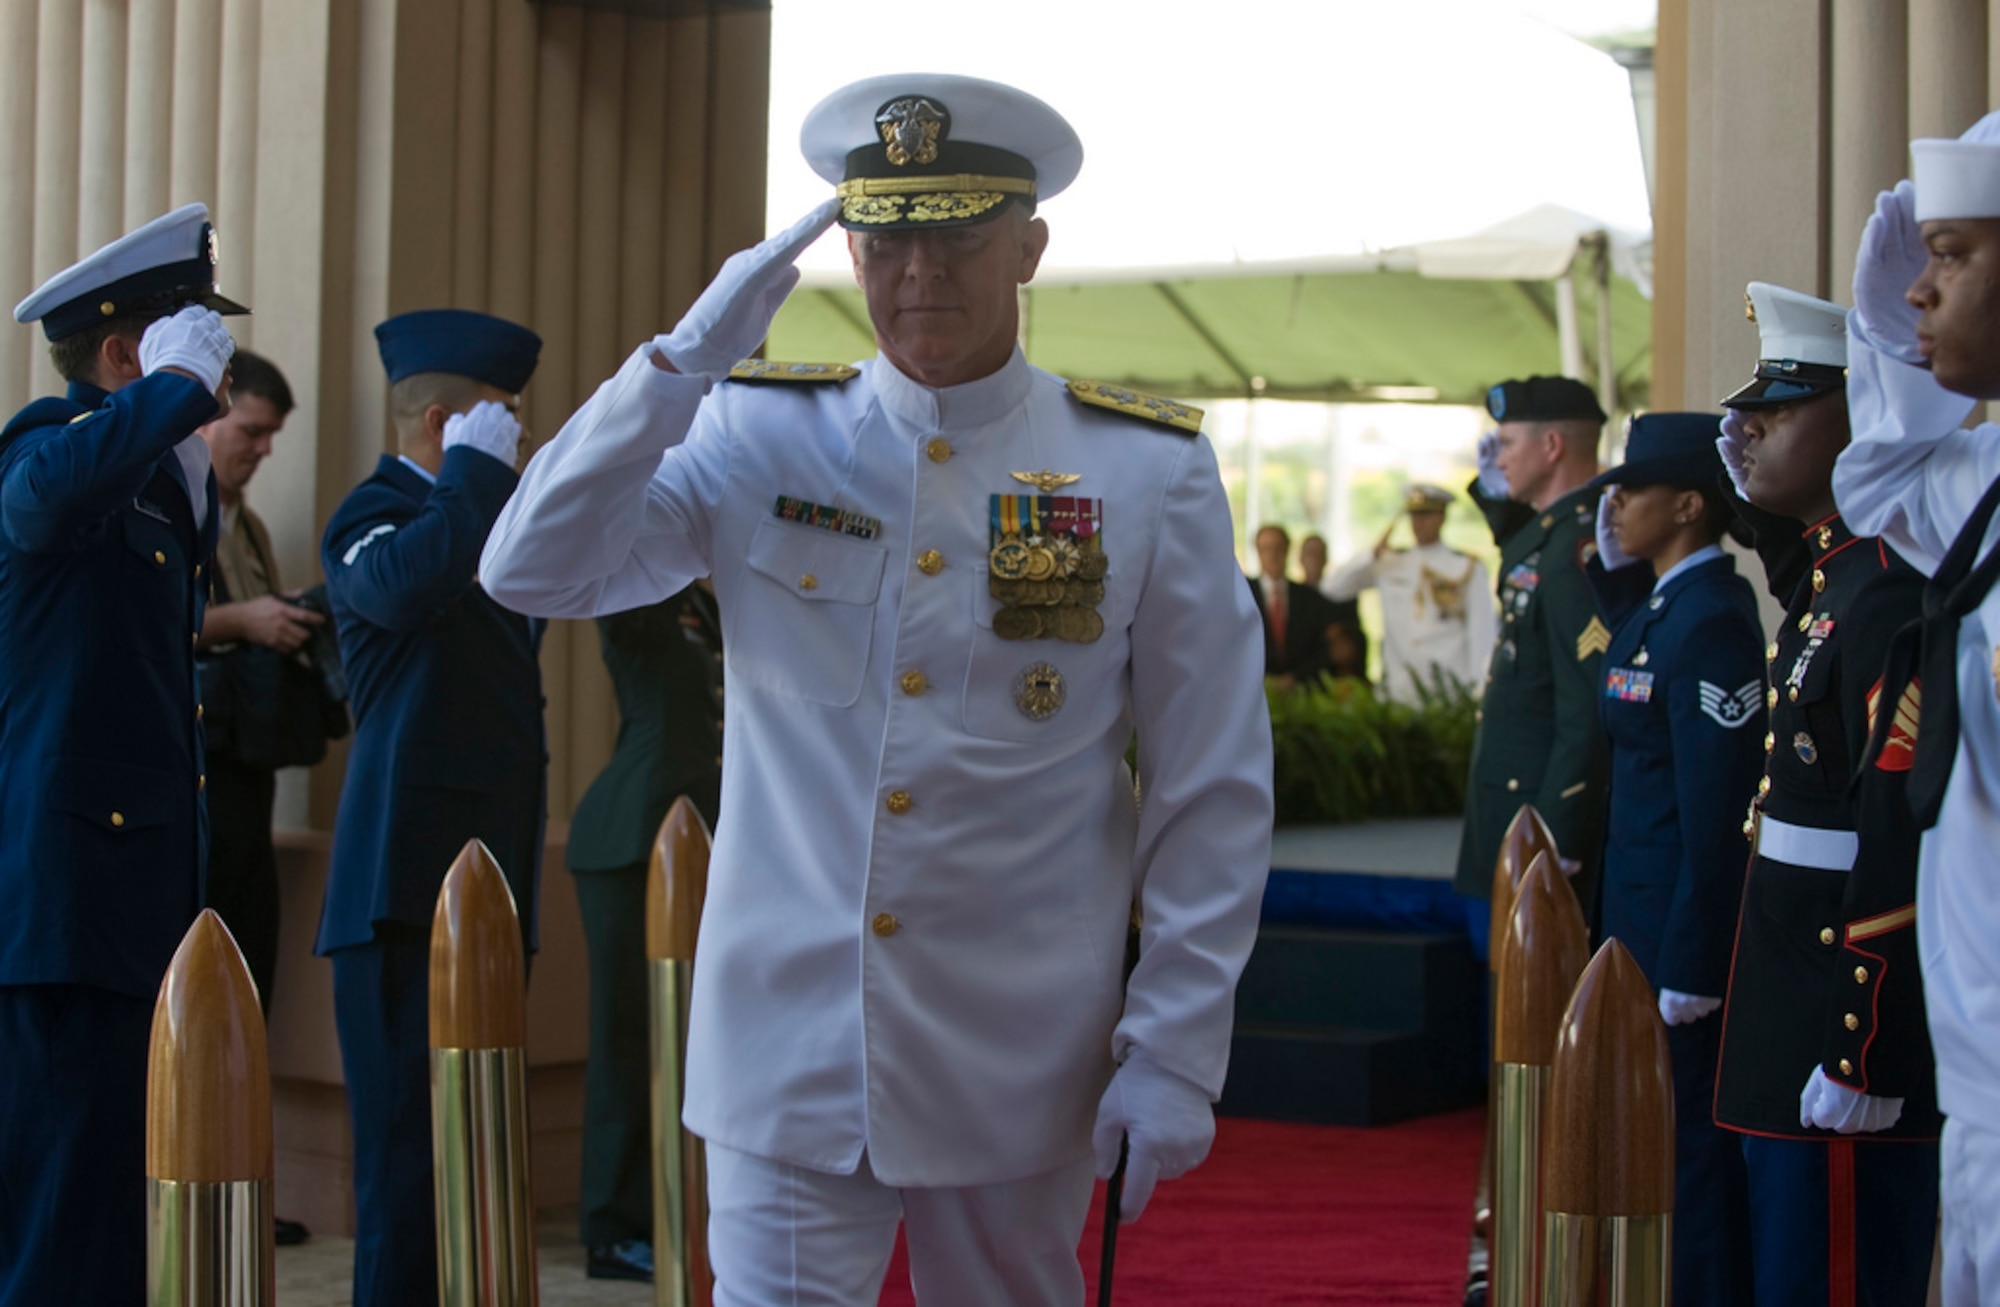 Adm. Robert F. Willard, incoming commander of U.S. Pacific Command, renders a salute as he passes through side boys during the U.S. PaCom change of command ceremony Oct. 19, 2009, at Camp H.M. Smith, Hawaii. Admiral Willard, former U.S. Pacific Fleet commander, assumed command of U.S. PaCom from Adm. Timothy J. Keating during the ceremony. (U.S. Navy photo/Navy Petty Officer 2nd Class Elisia V Gonzales)